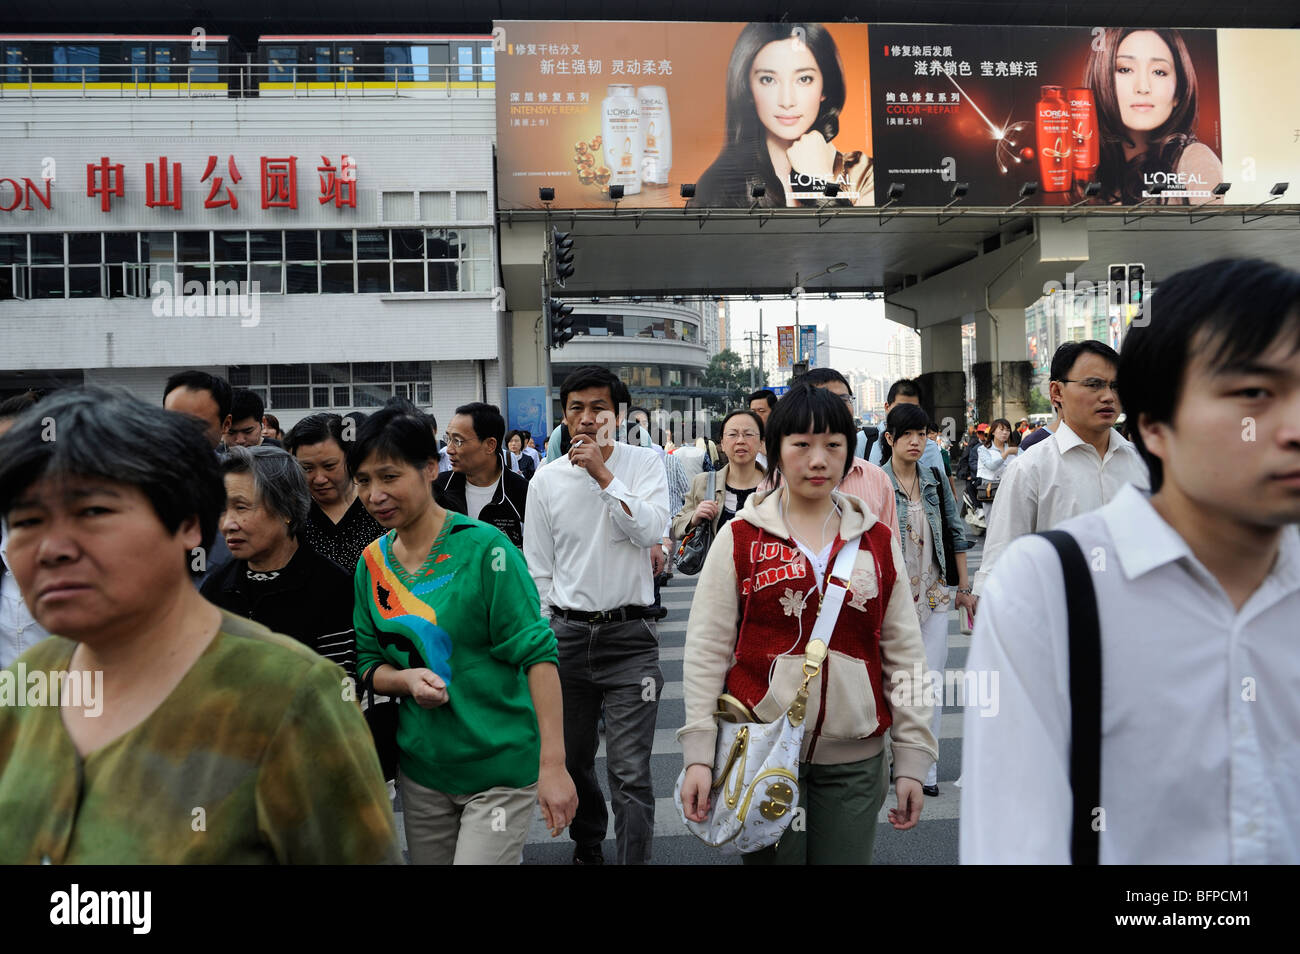 People walking through a street in Shanghai, China. 19-Oct-2009 Stock Photo